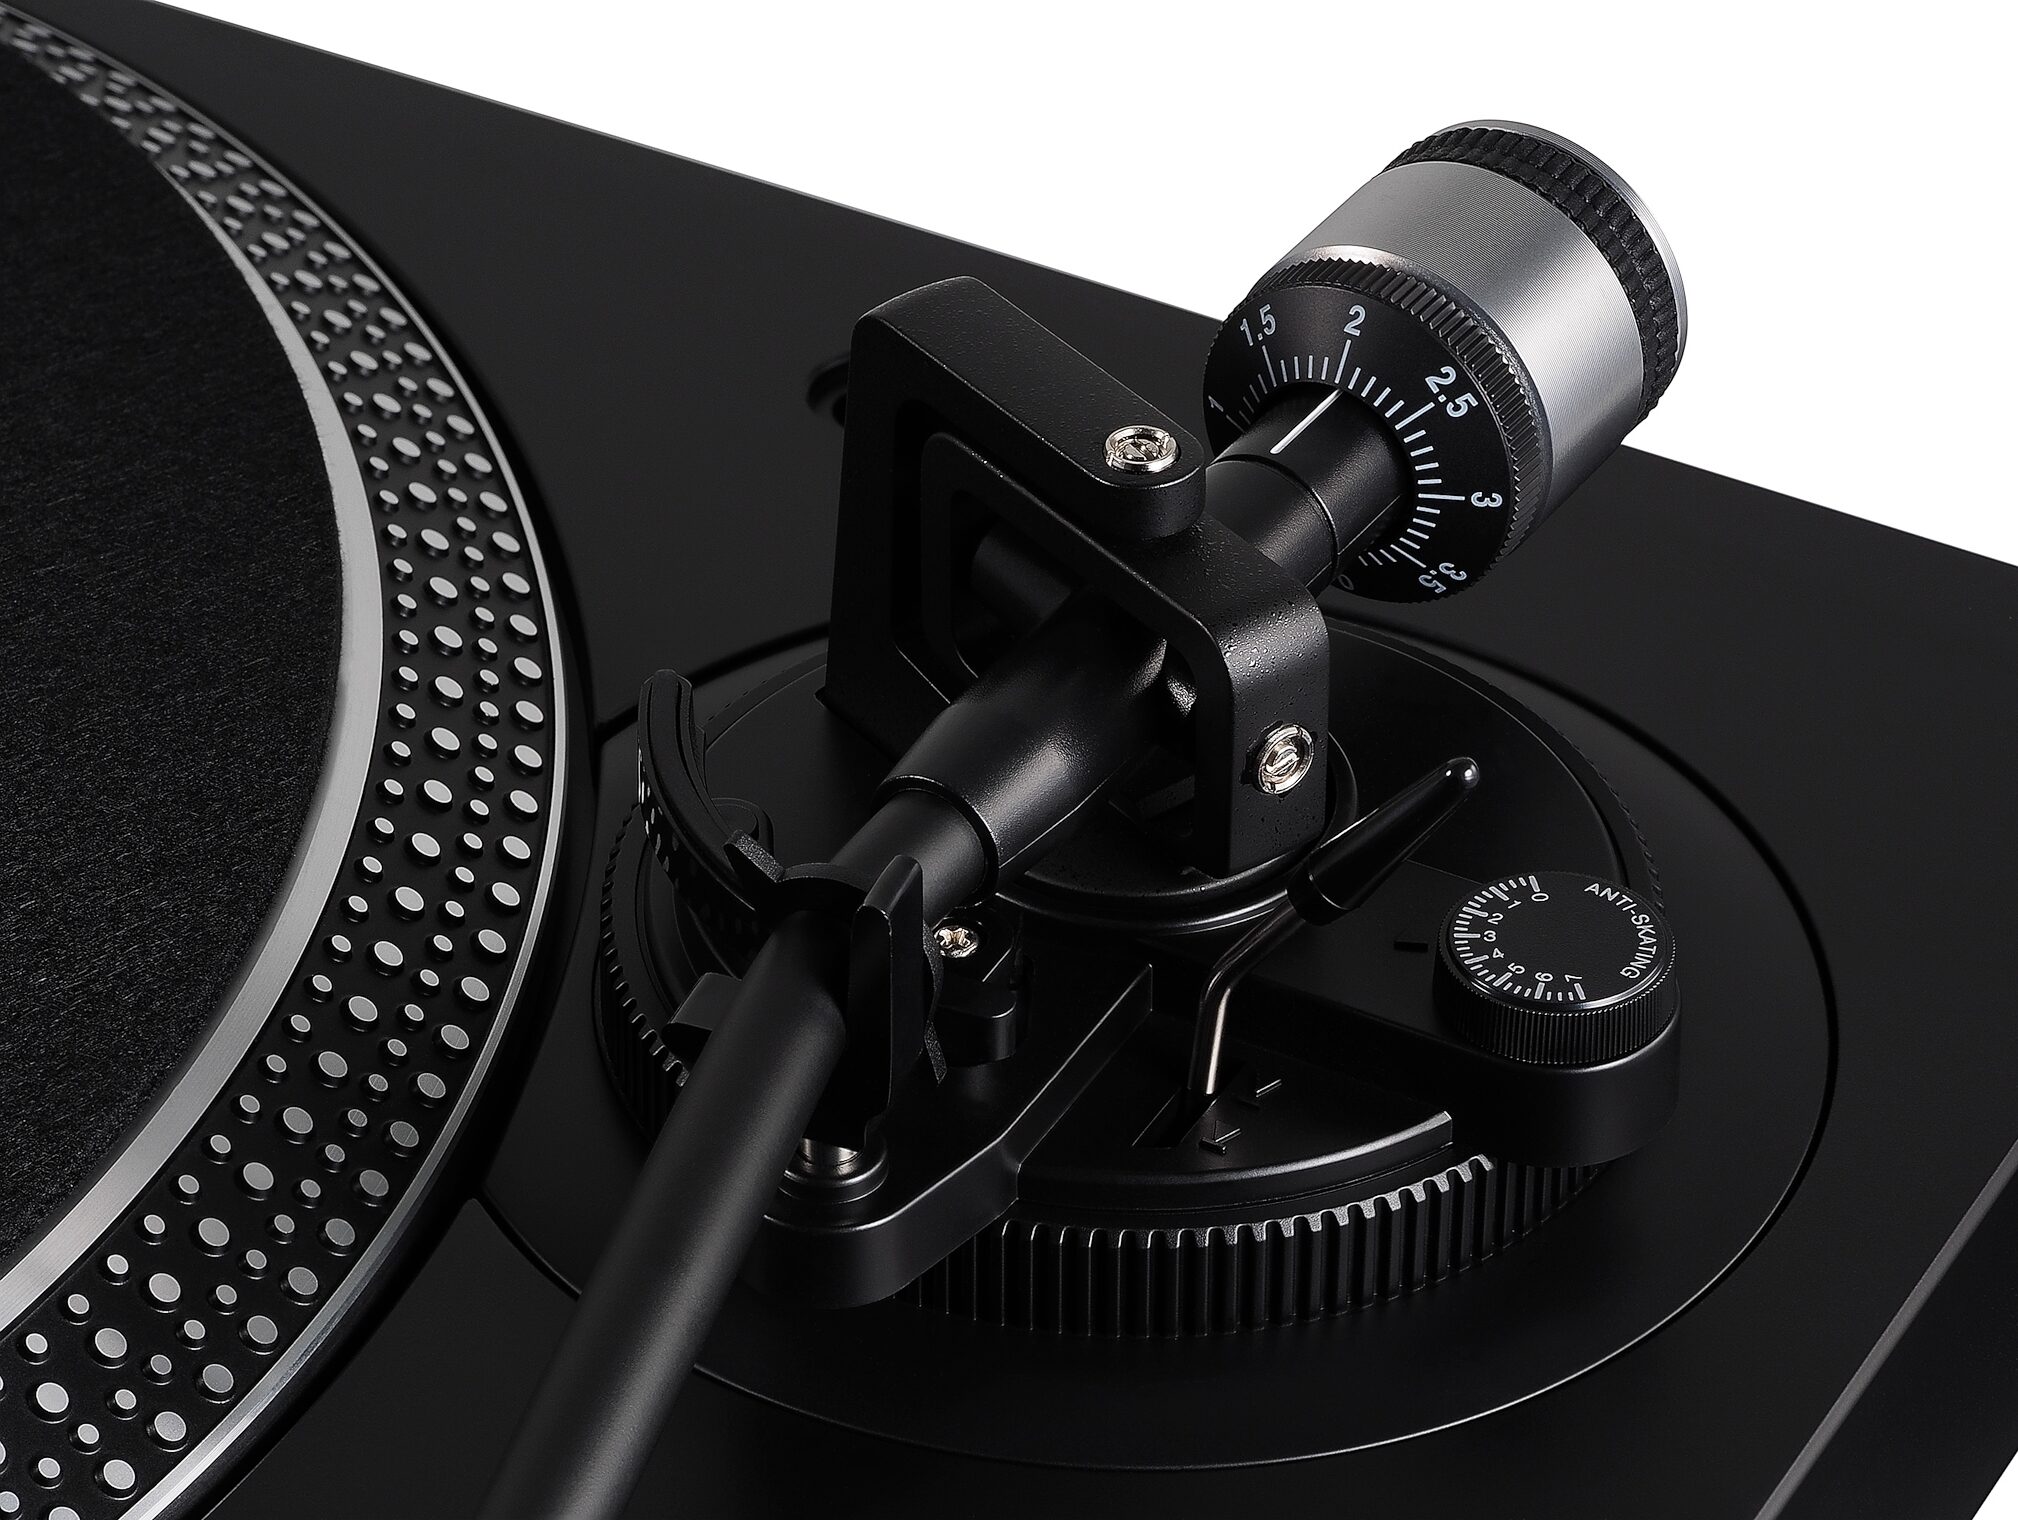 Best record player 2021: Retro, manual and Bluetooth turntables